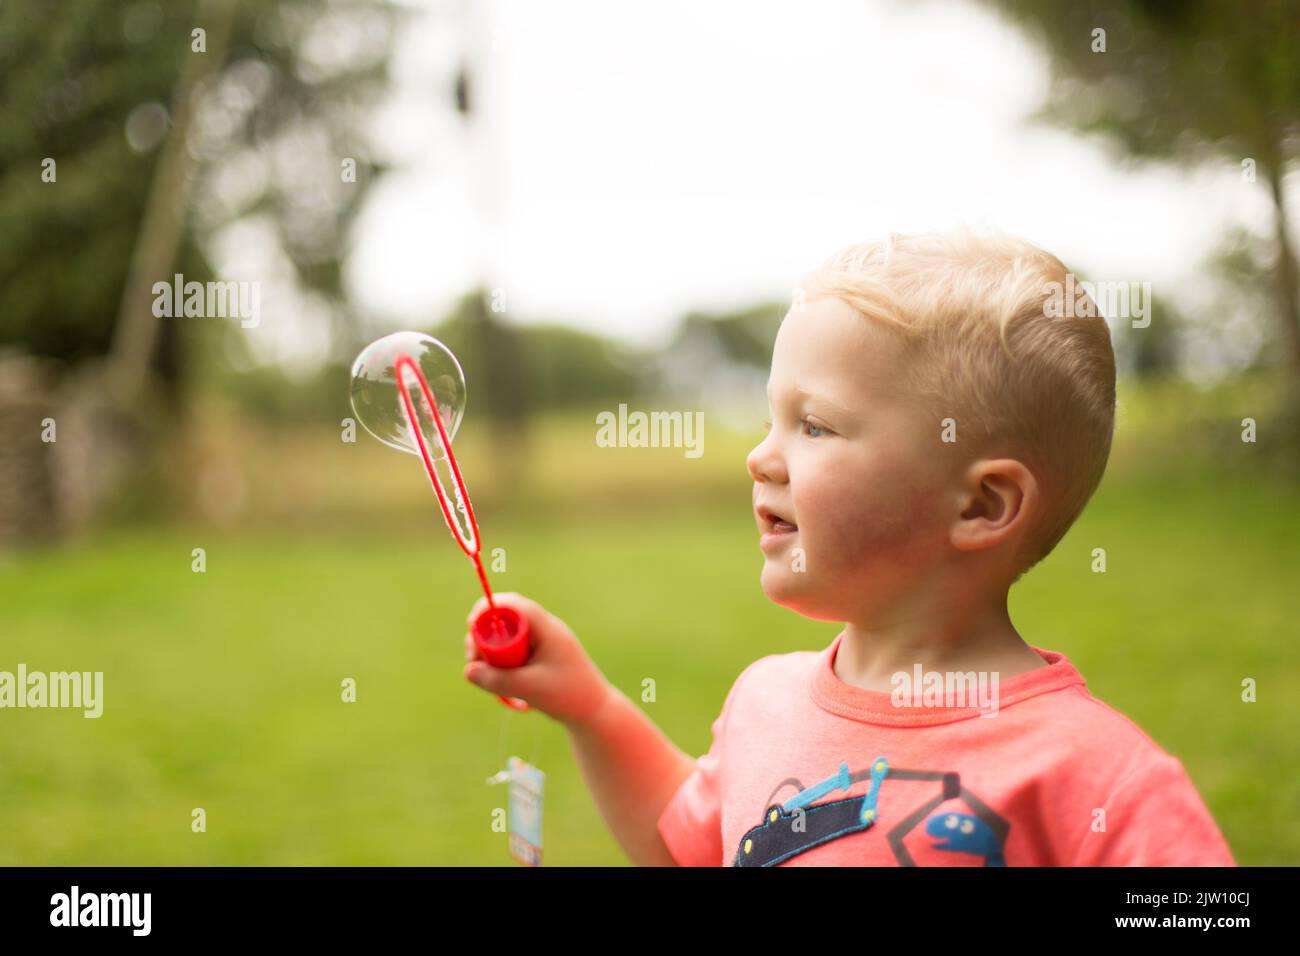 Young toddler playing with bubbles outside on a field. Stock Photo